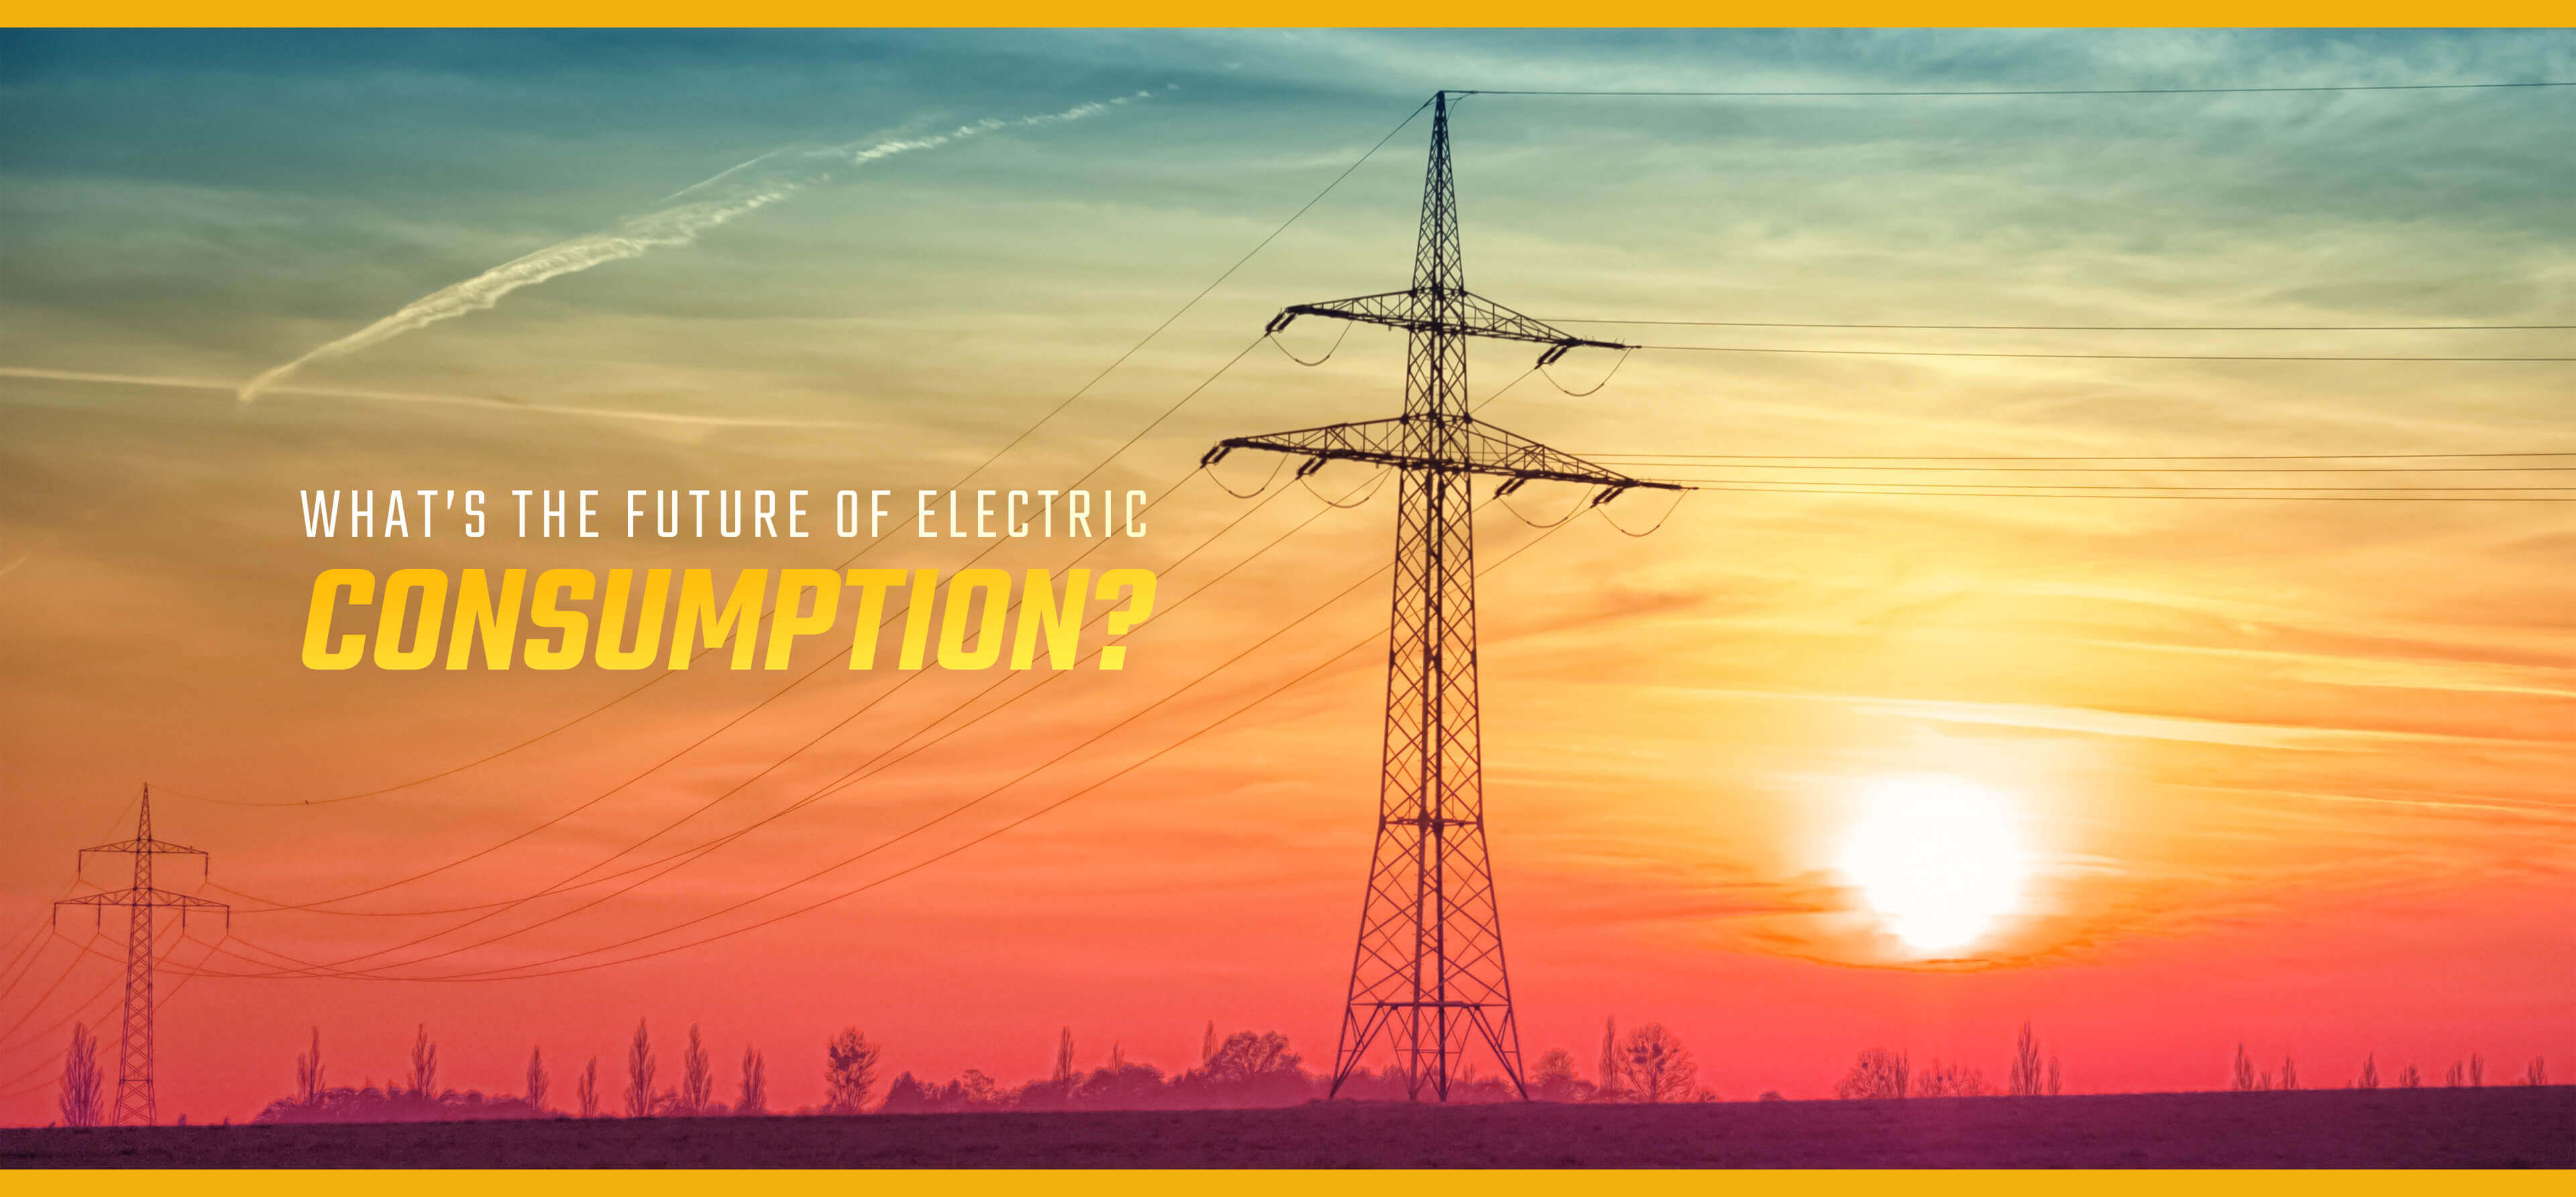 What’s the future of electric consumption?